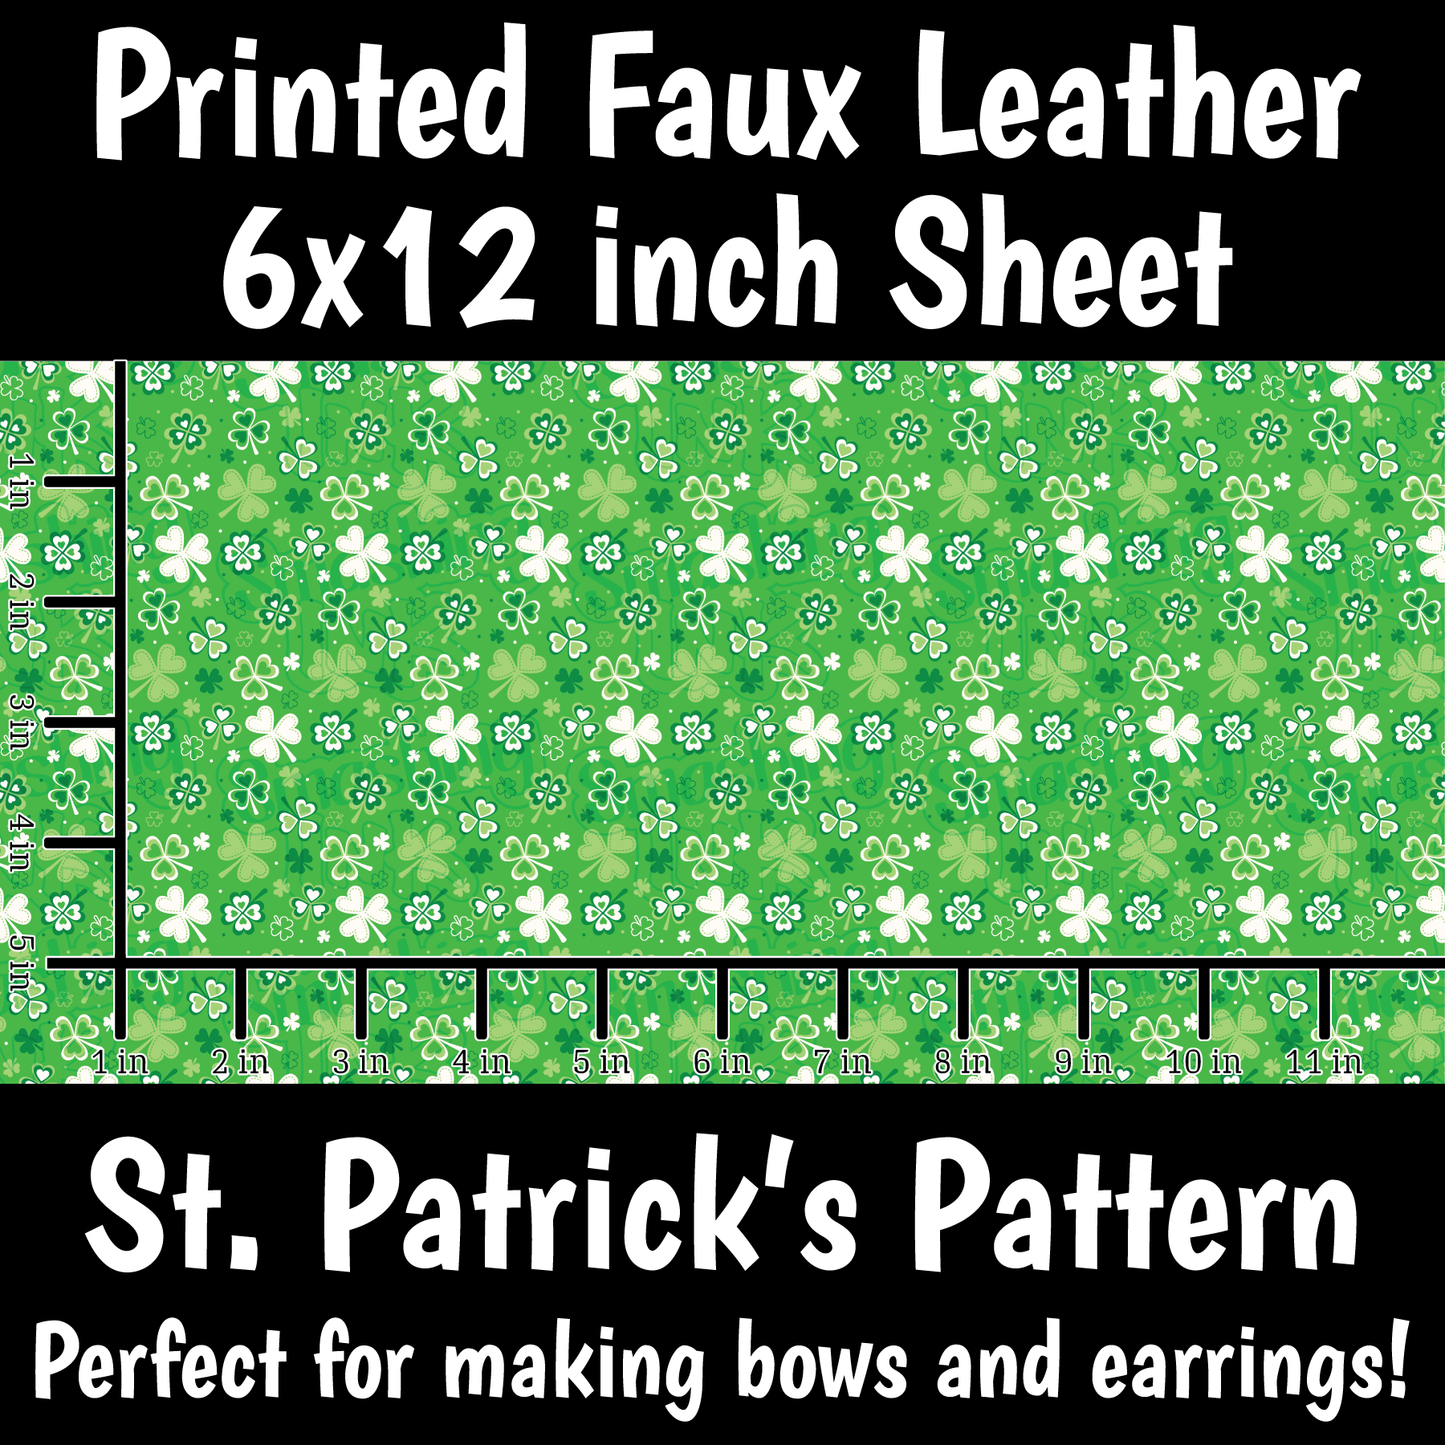 St. Patrick's Pattern - Faux Leather Sheet (SHIPS IN 3 BUS DAYS)